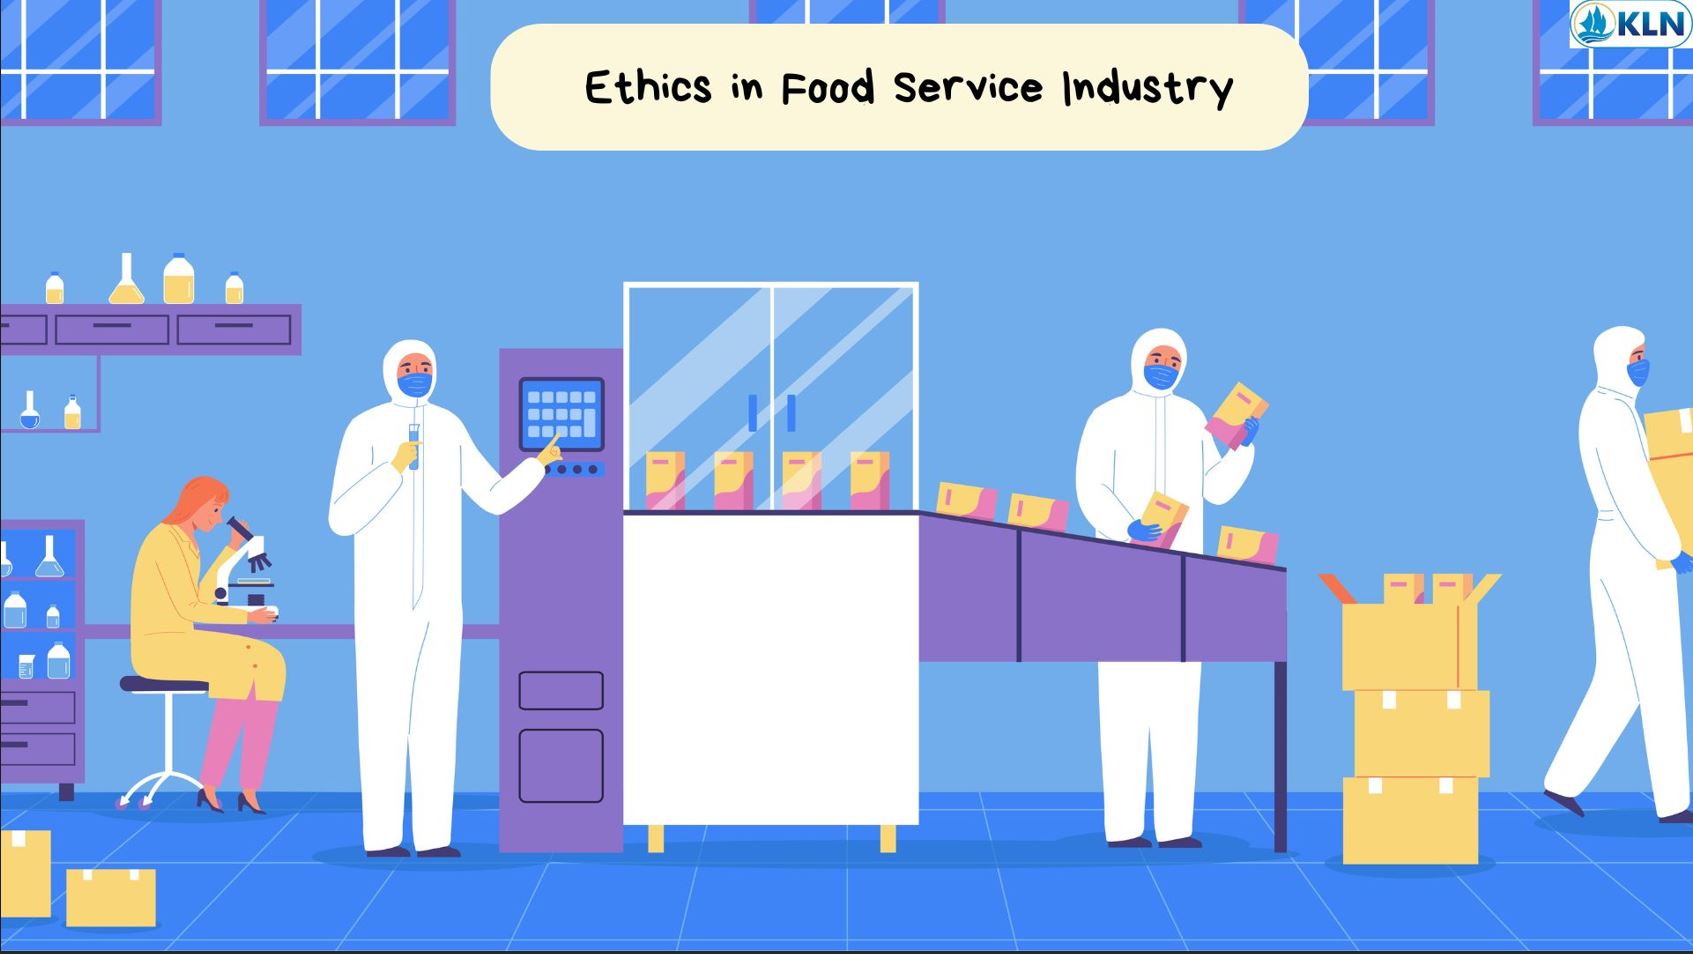 Ethics in Food Service Industry